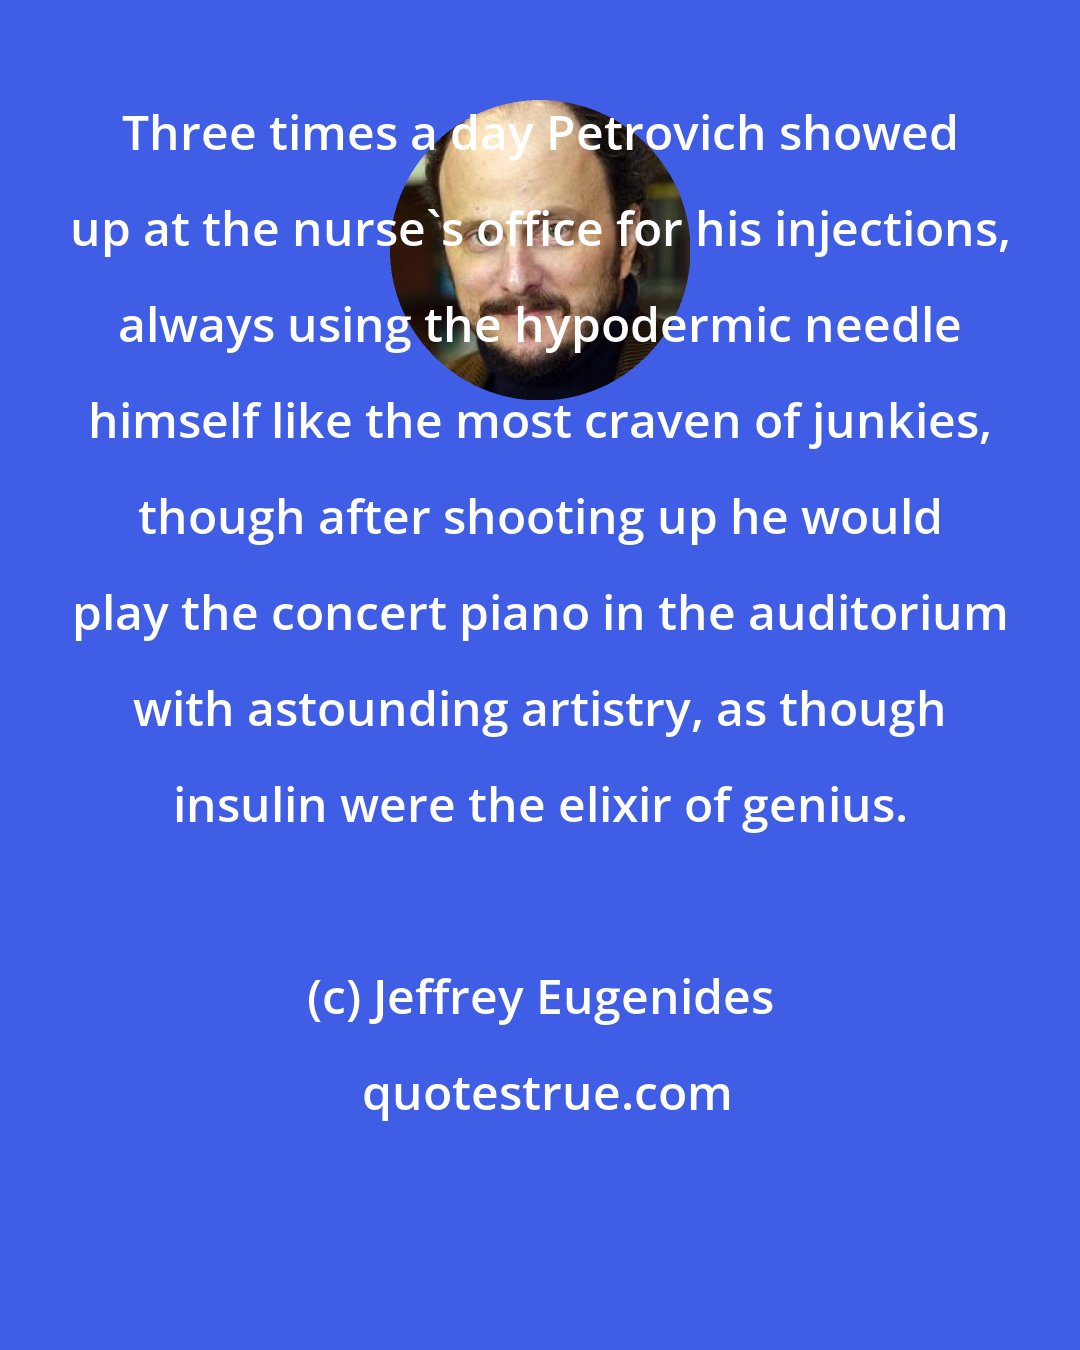 Jeffrey Eugenides: Three times a day Petrovich showed up at the nurse's office for his injections, always using the hypodermic needle himself like the most craven of junkies, though after shooting up he would play the concert piano in the auditorium with astounding artistry, as though insulin were the elixir of genius.